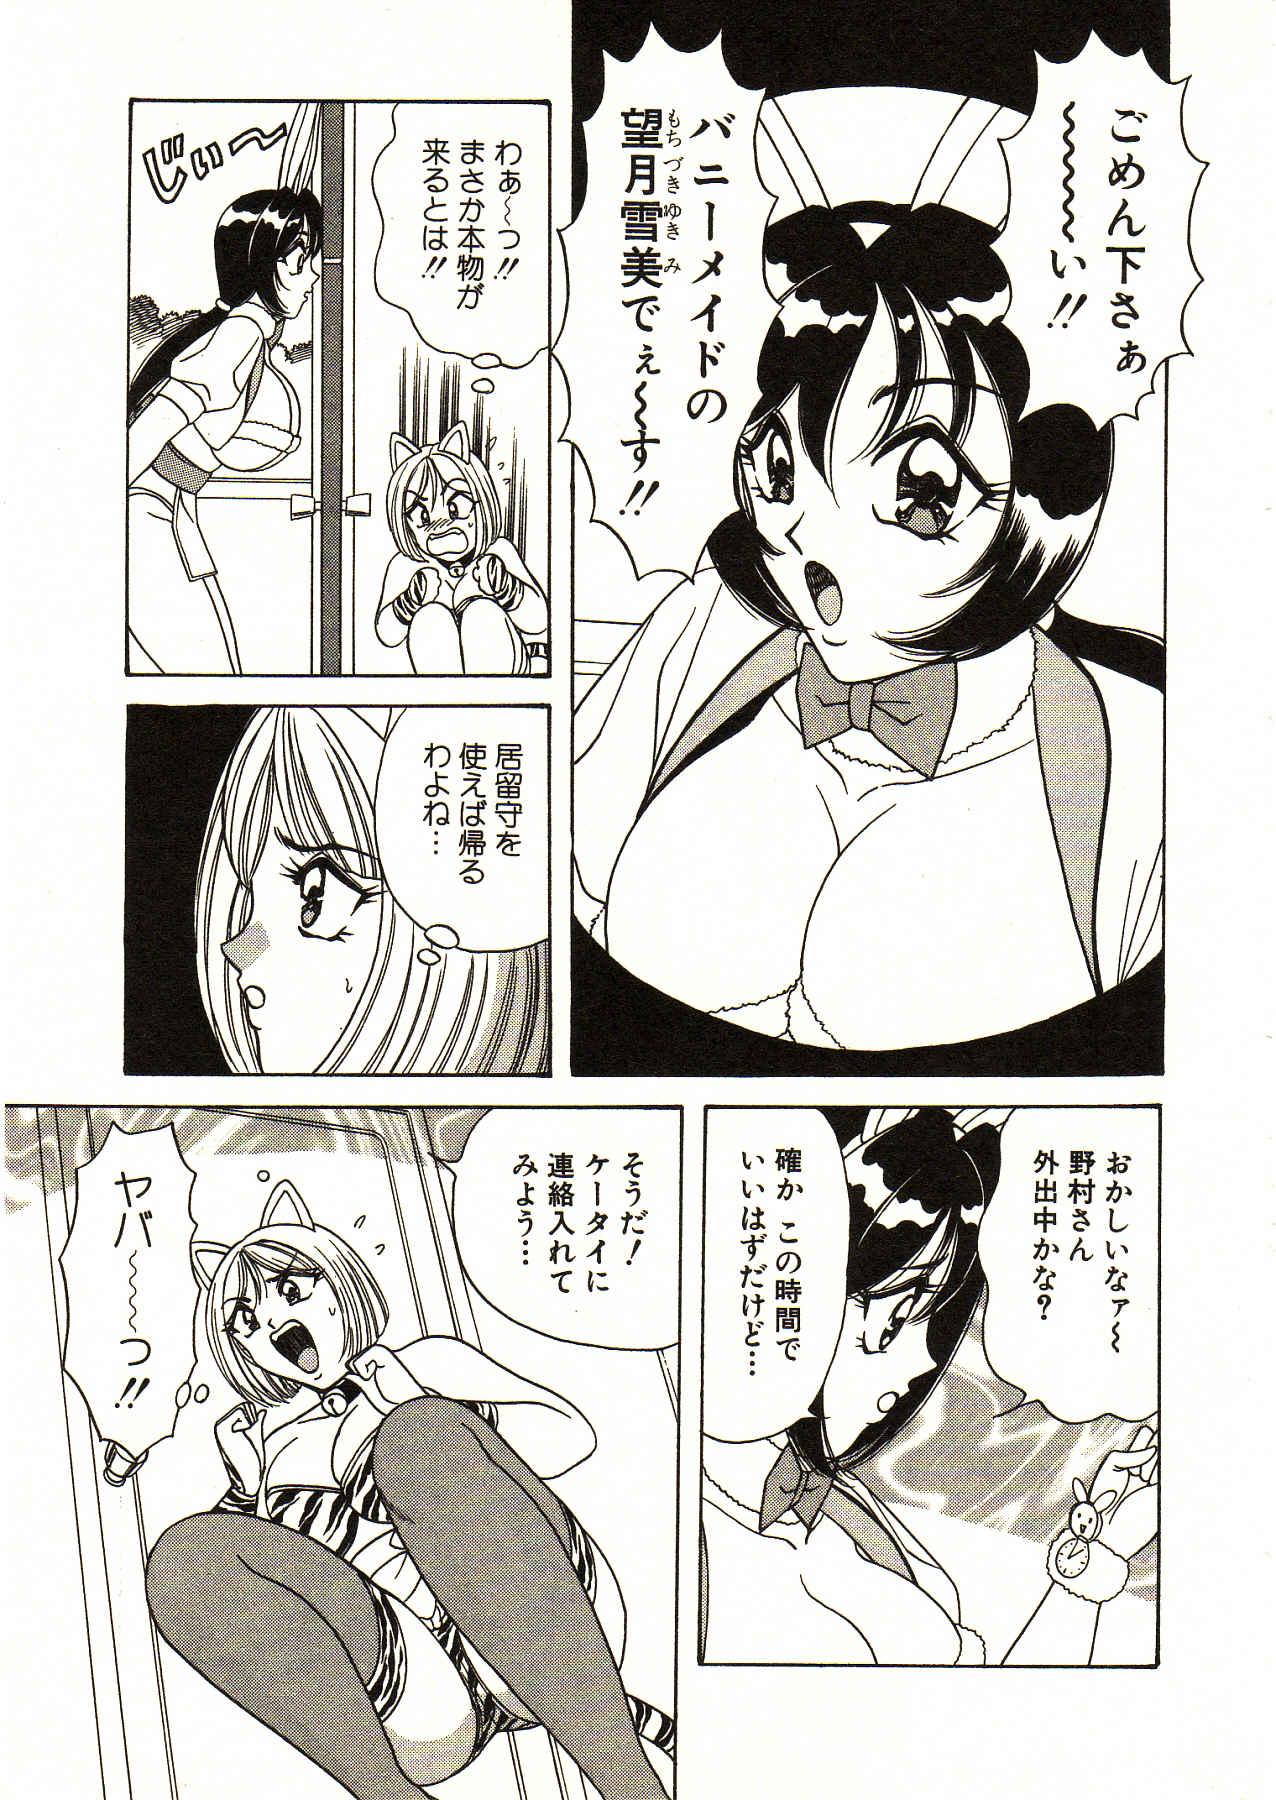 African Itoshi no Bunny Maid Gagging - Page 11